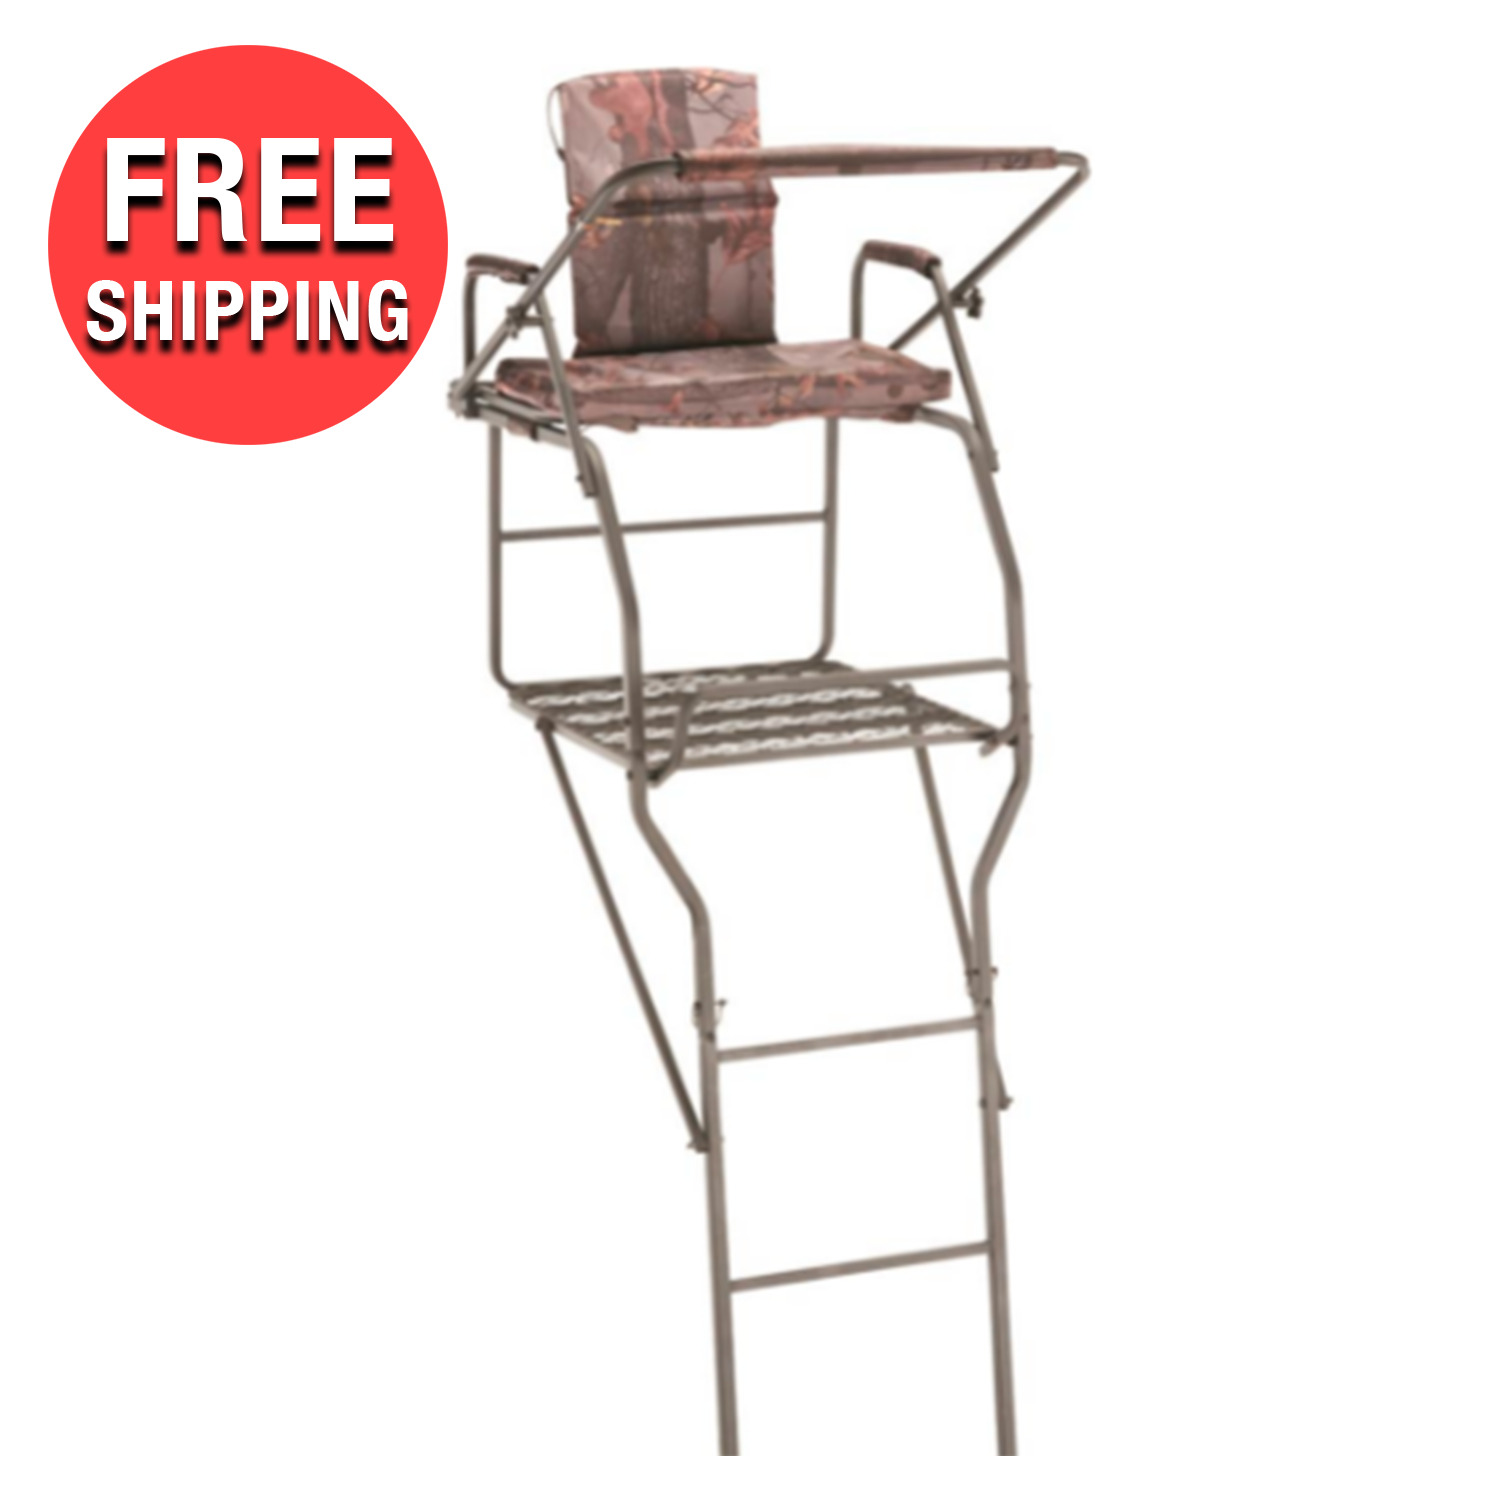 Extra-Large Ladder Padded Seat Tree Stand 18 Foot Tall Outdoor Hunt Game Sports 